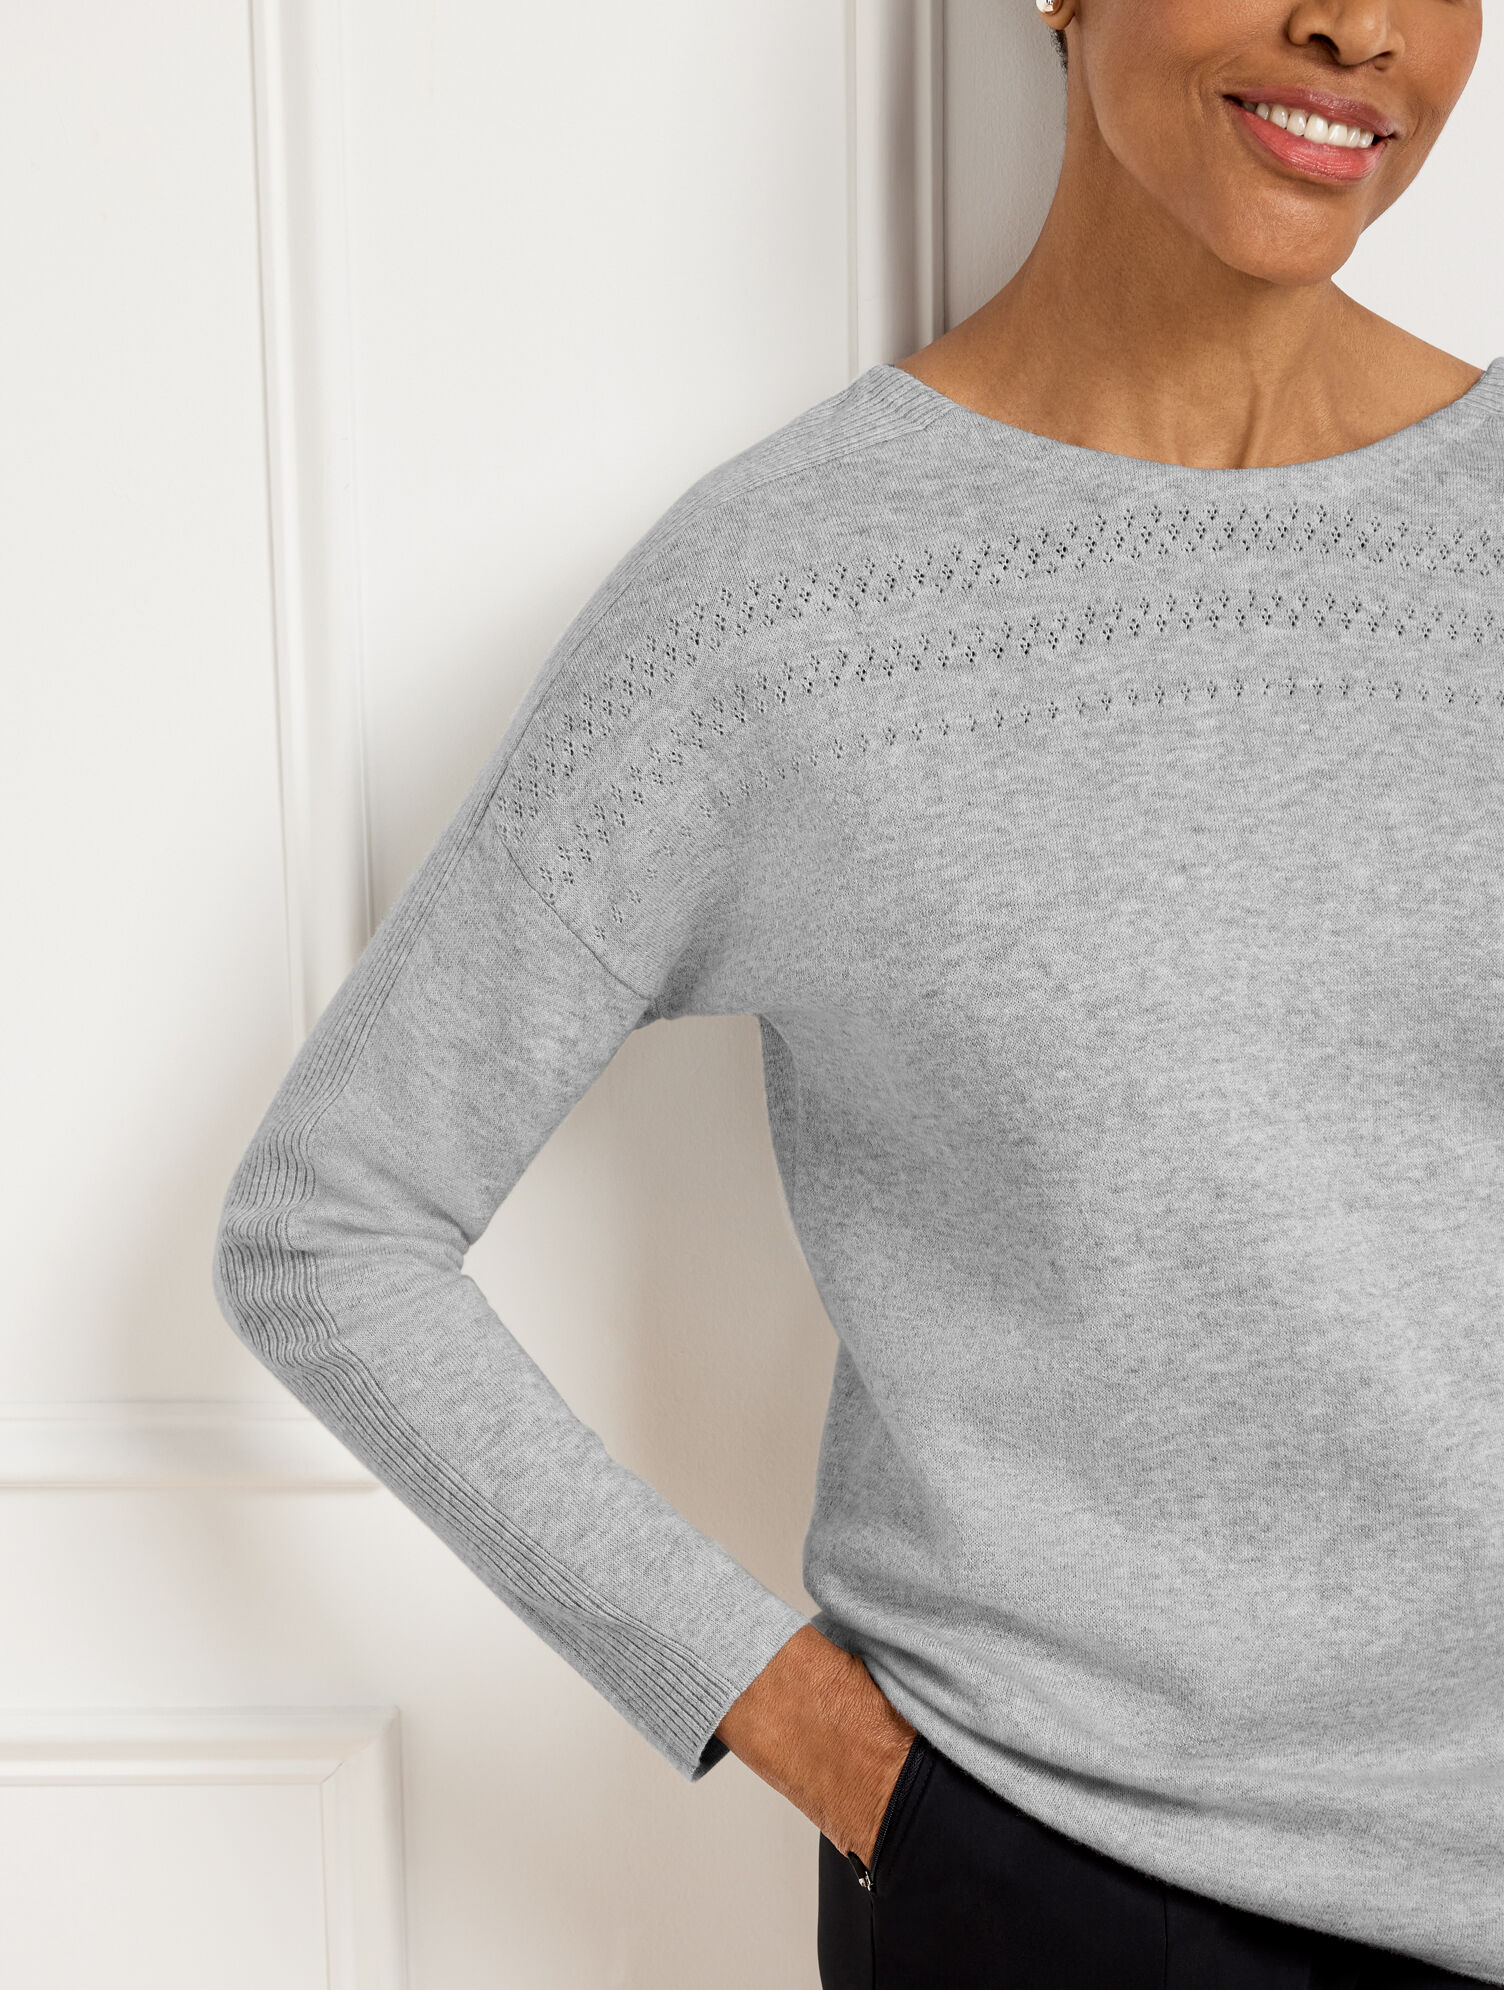 Women's Pointelle Cable Knit Jumper in Light Grey Marl